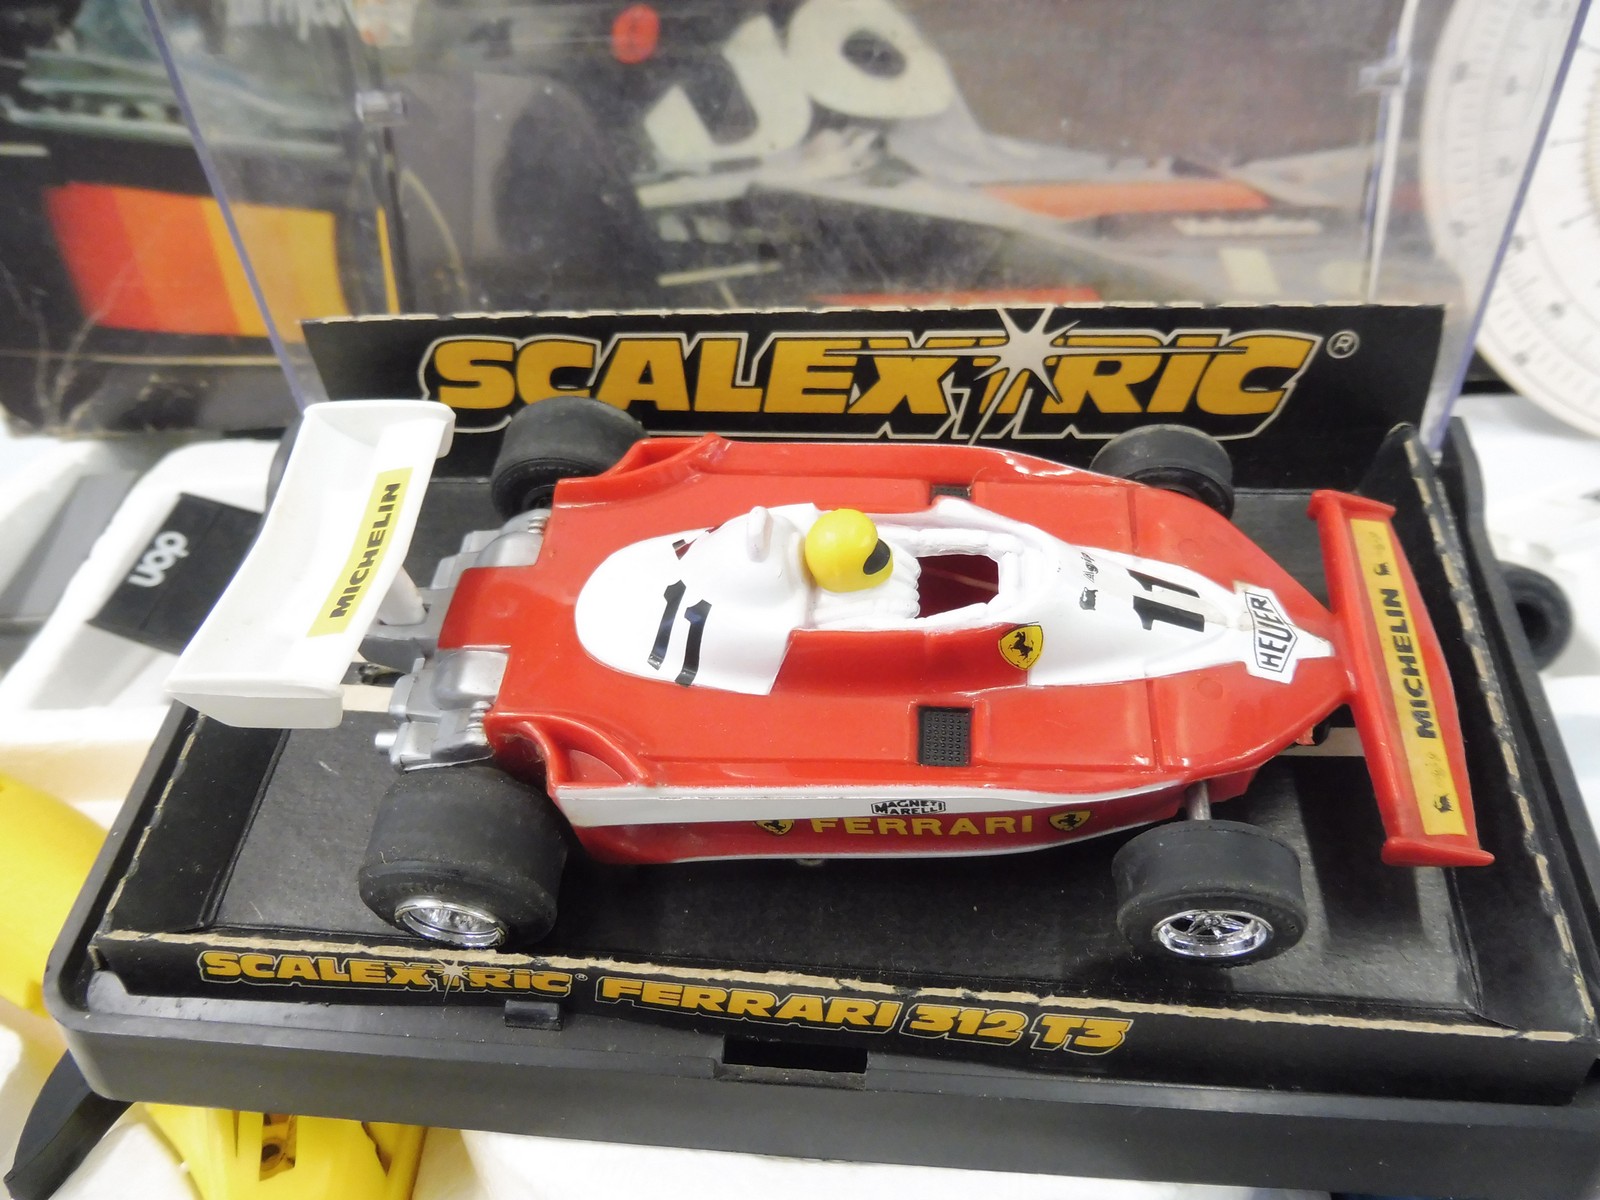 A Scalextric 200, appears complete and in very nice condition, plus an extra car, a Ferrari 312. - Image 4 of 5